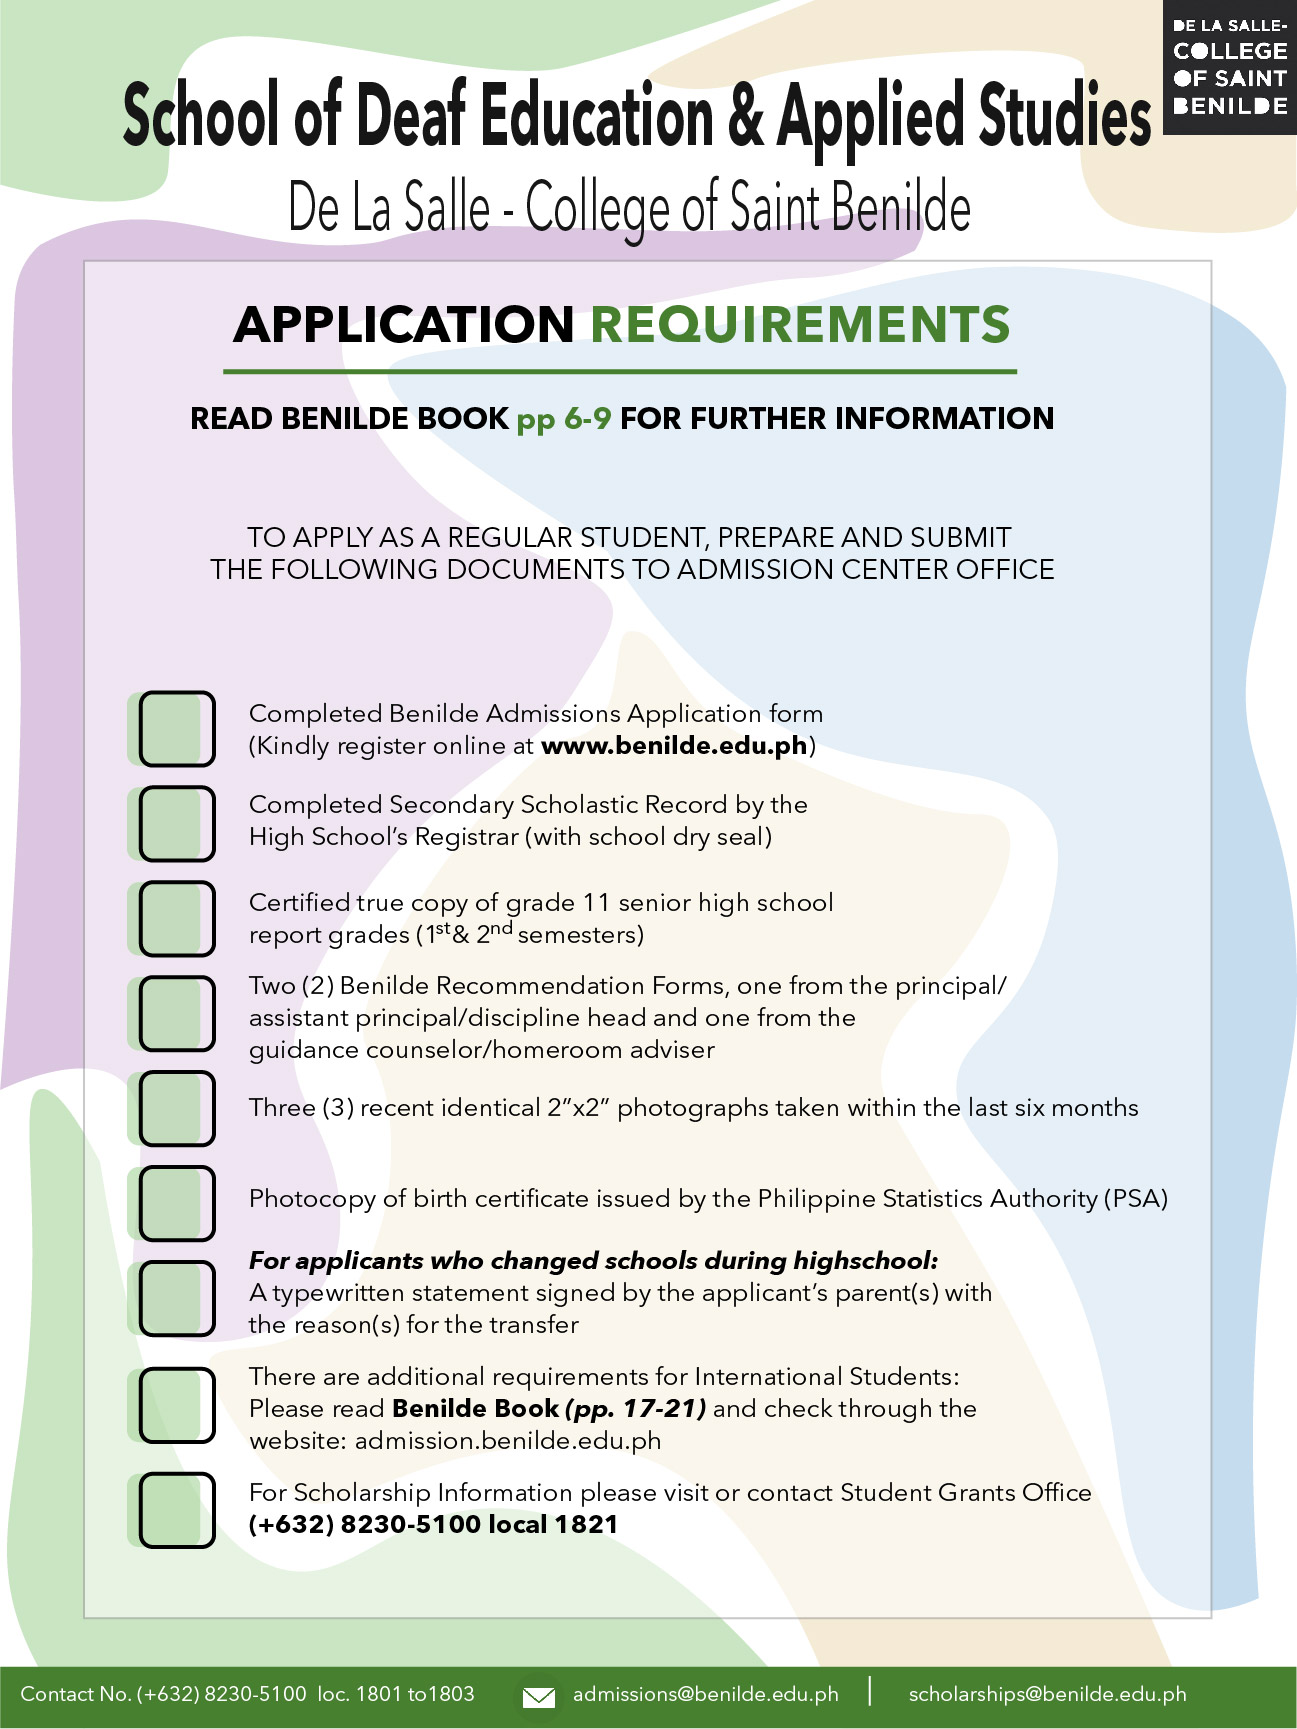 APPLICATION REQUIREMENT